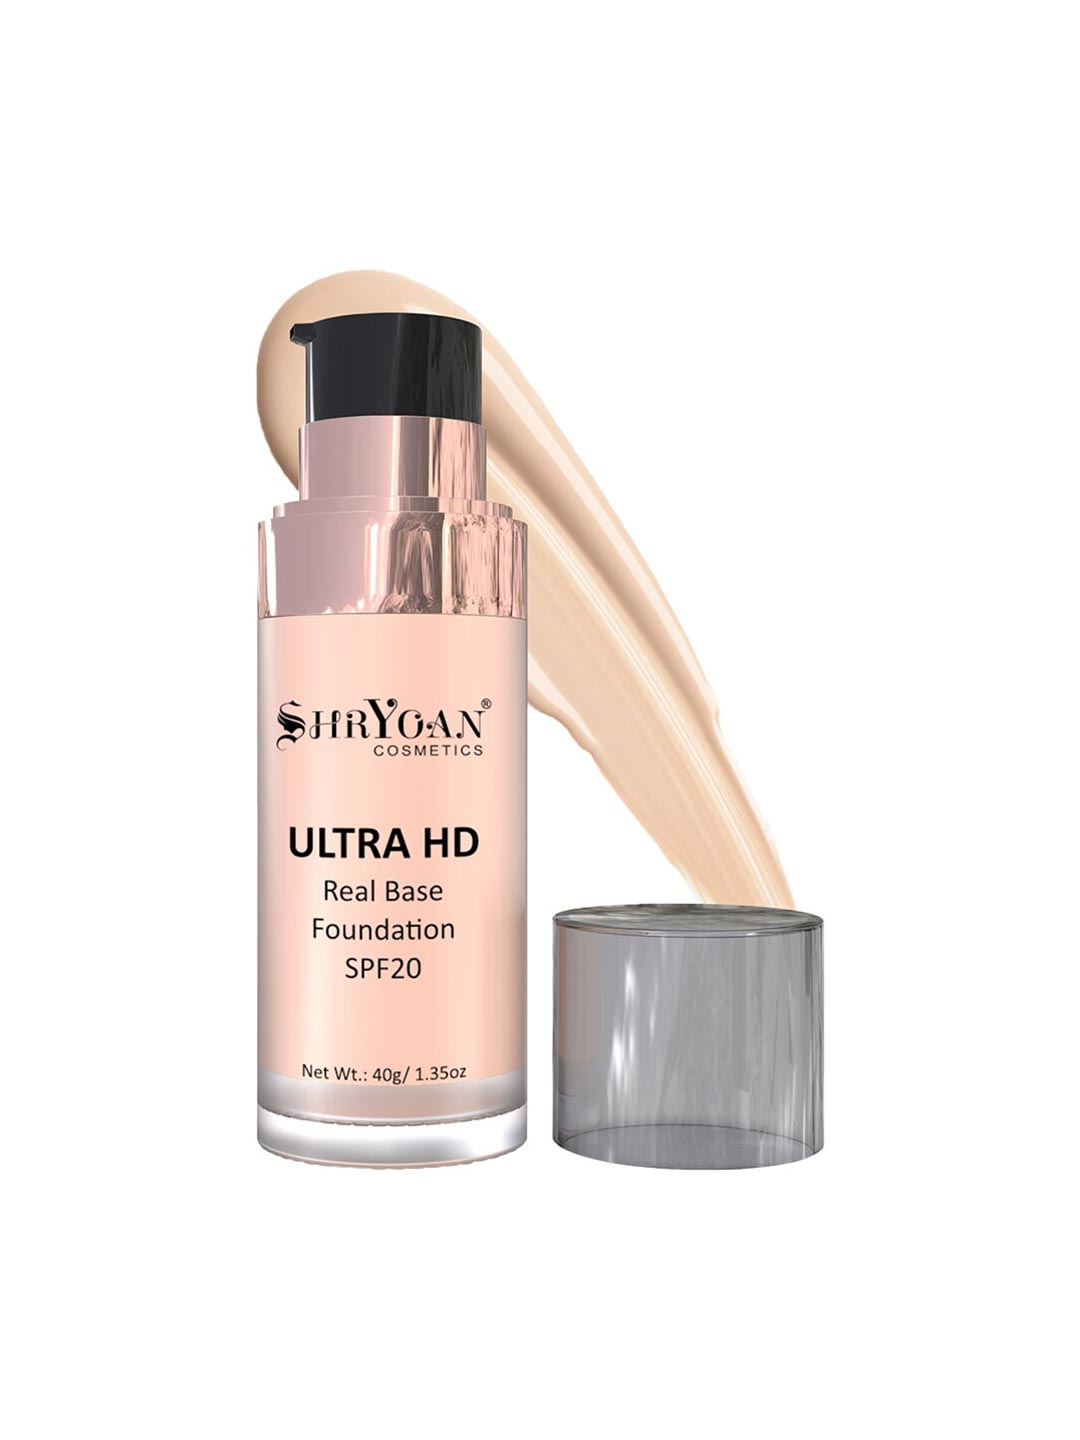 SHRYOAN Ultra HD Real Base Foundation Price in India